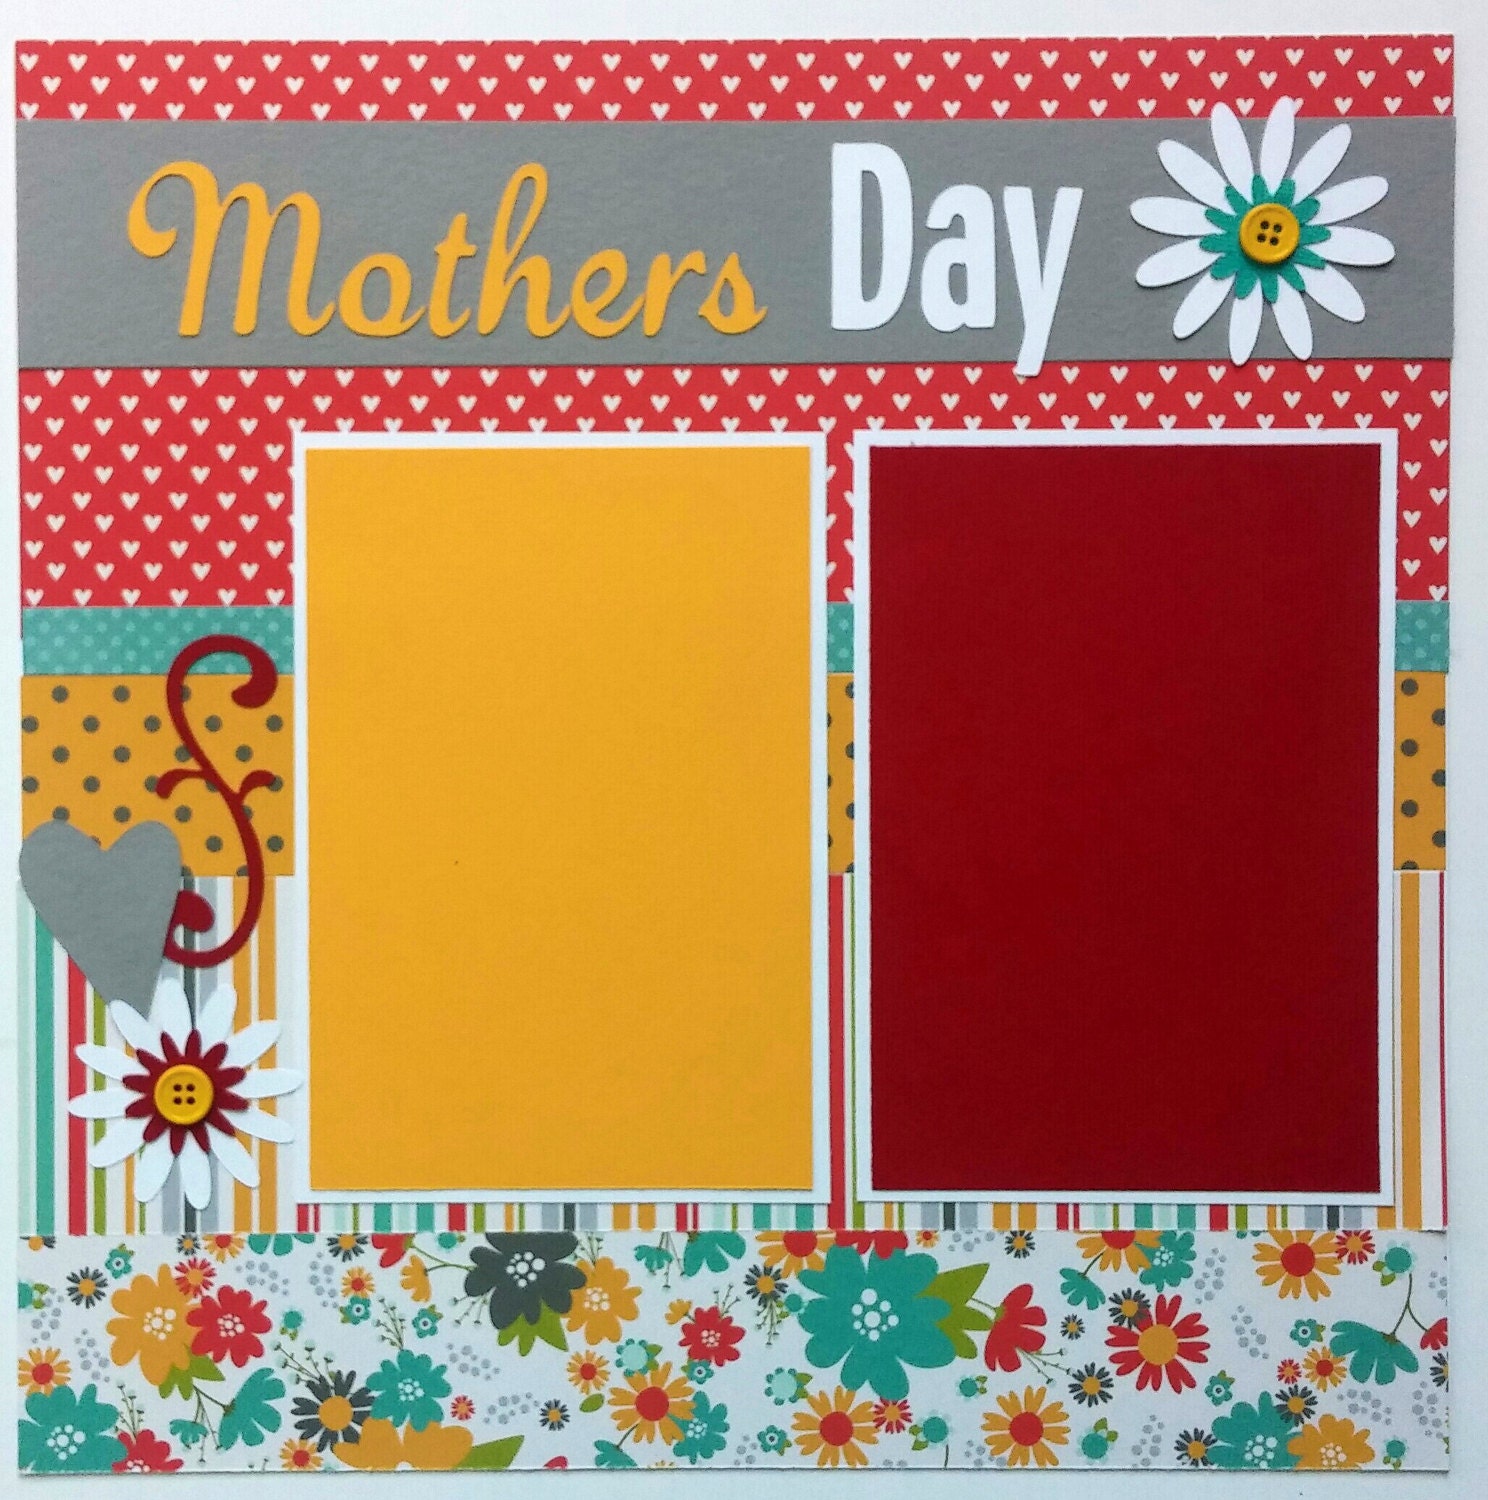 mothers-day-scrapbook-page-12x12-scrapbook-page-mothers-day